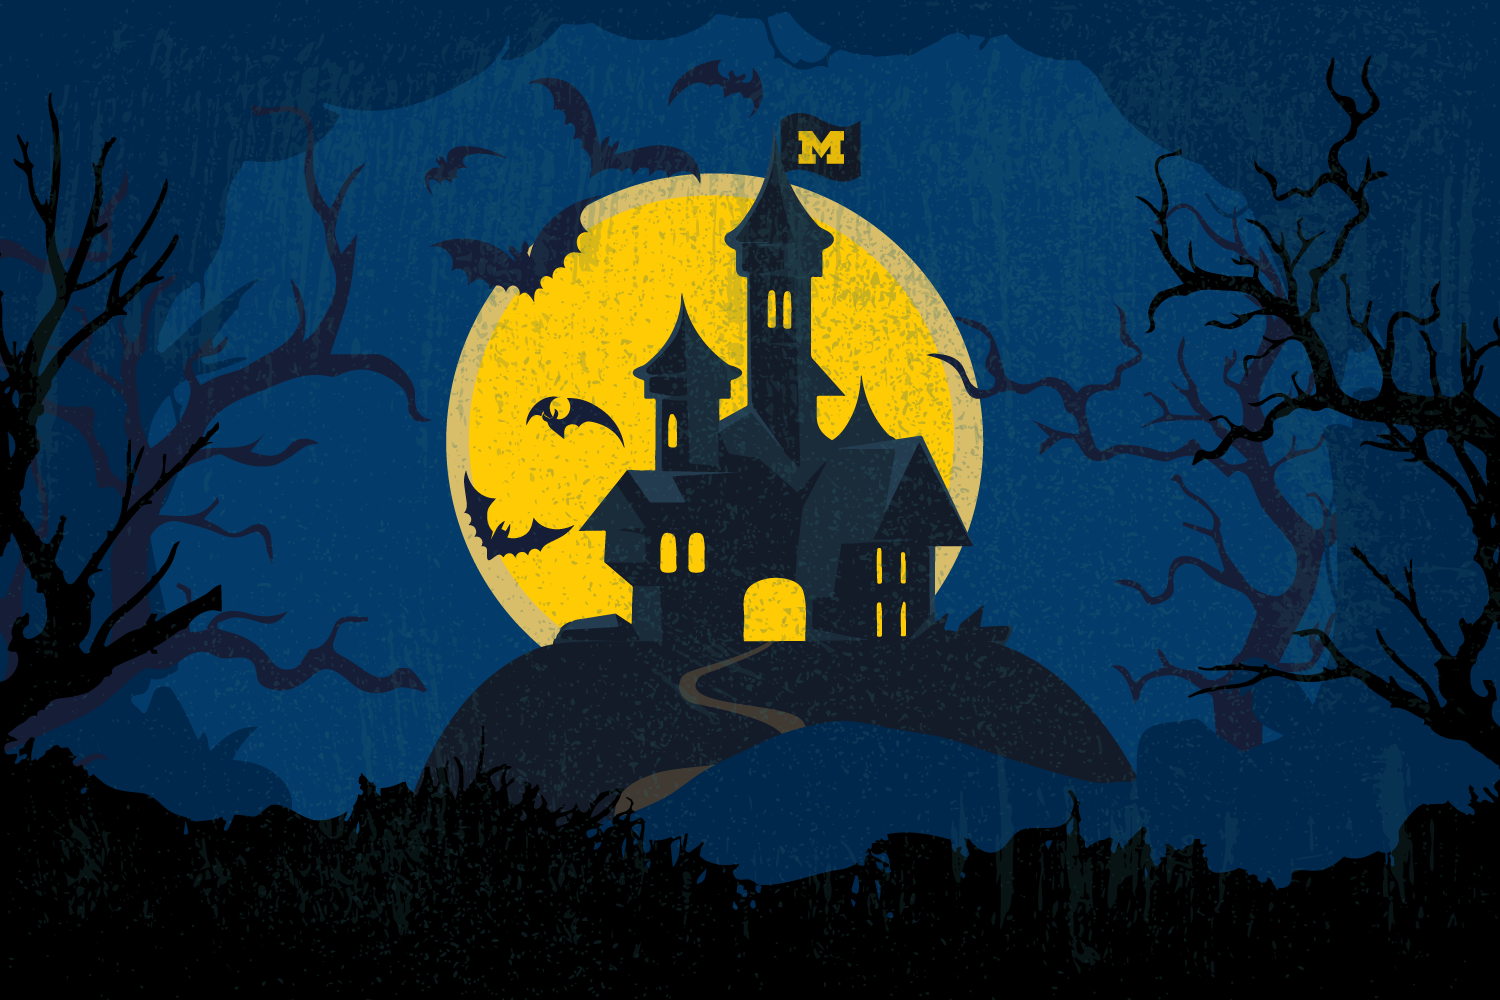 Spooky Halloween Manor with Bats and a U-M Flag at the top